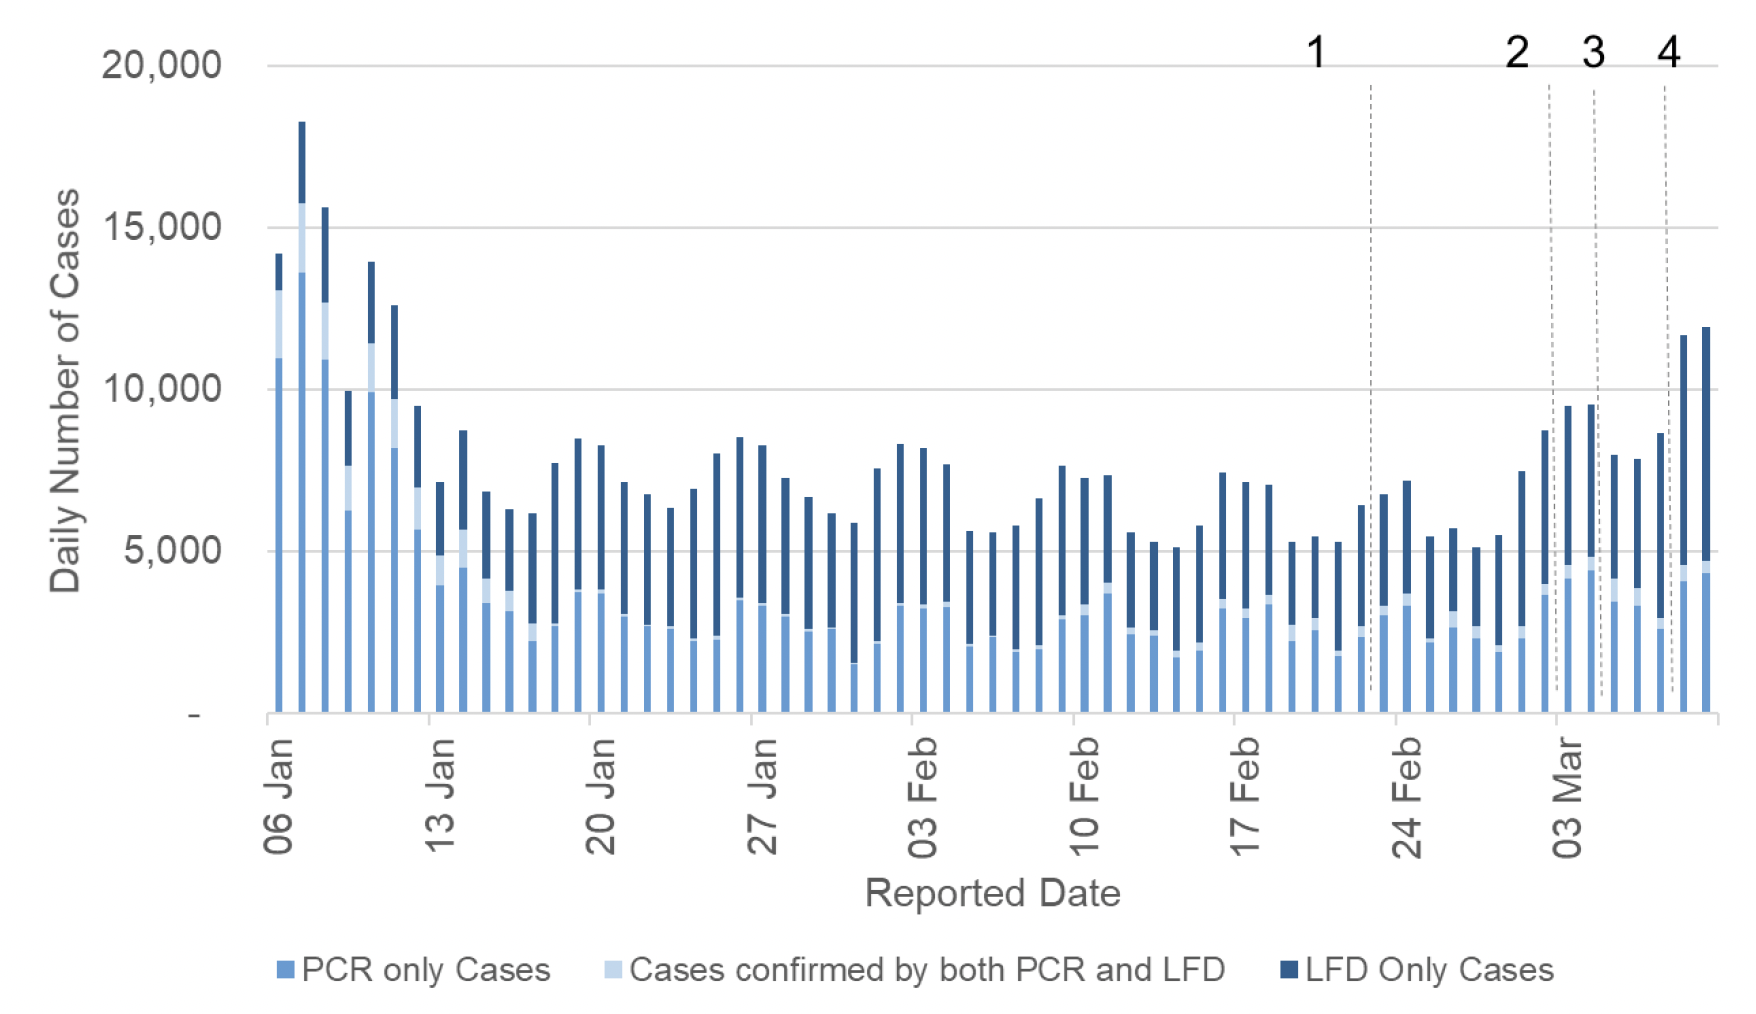 Figure 1. A line chart showing the number of PCR and LFD cases by reporting date, with lines showing the cut-off points for each of the modelling inputs.